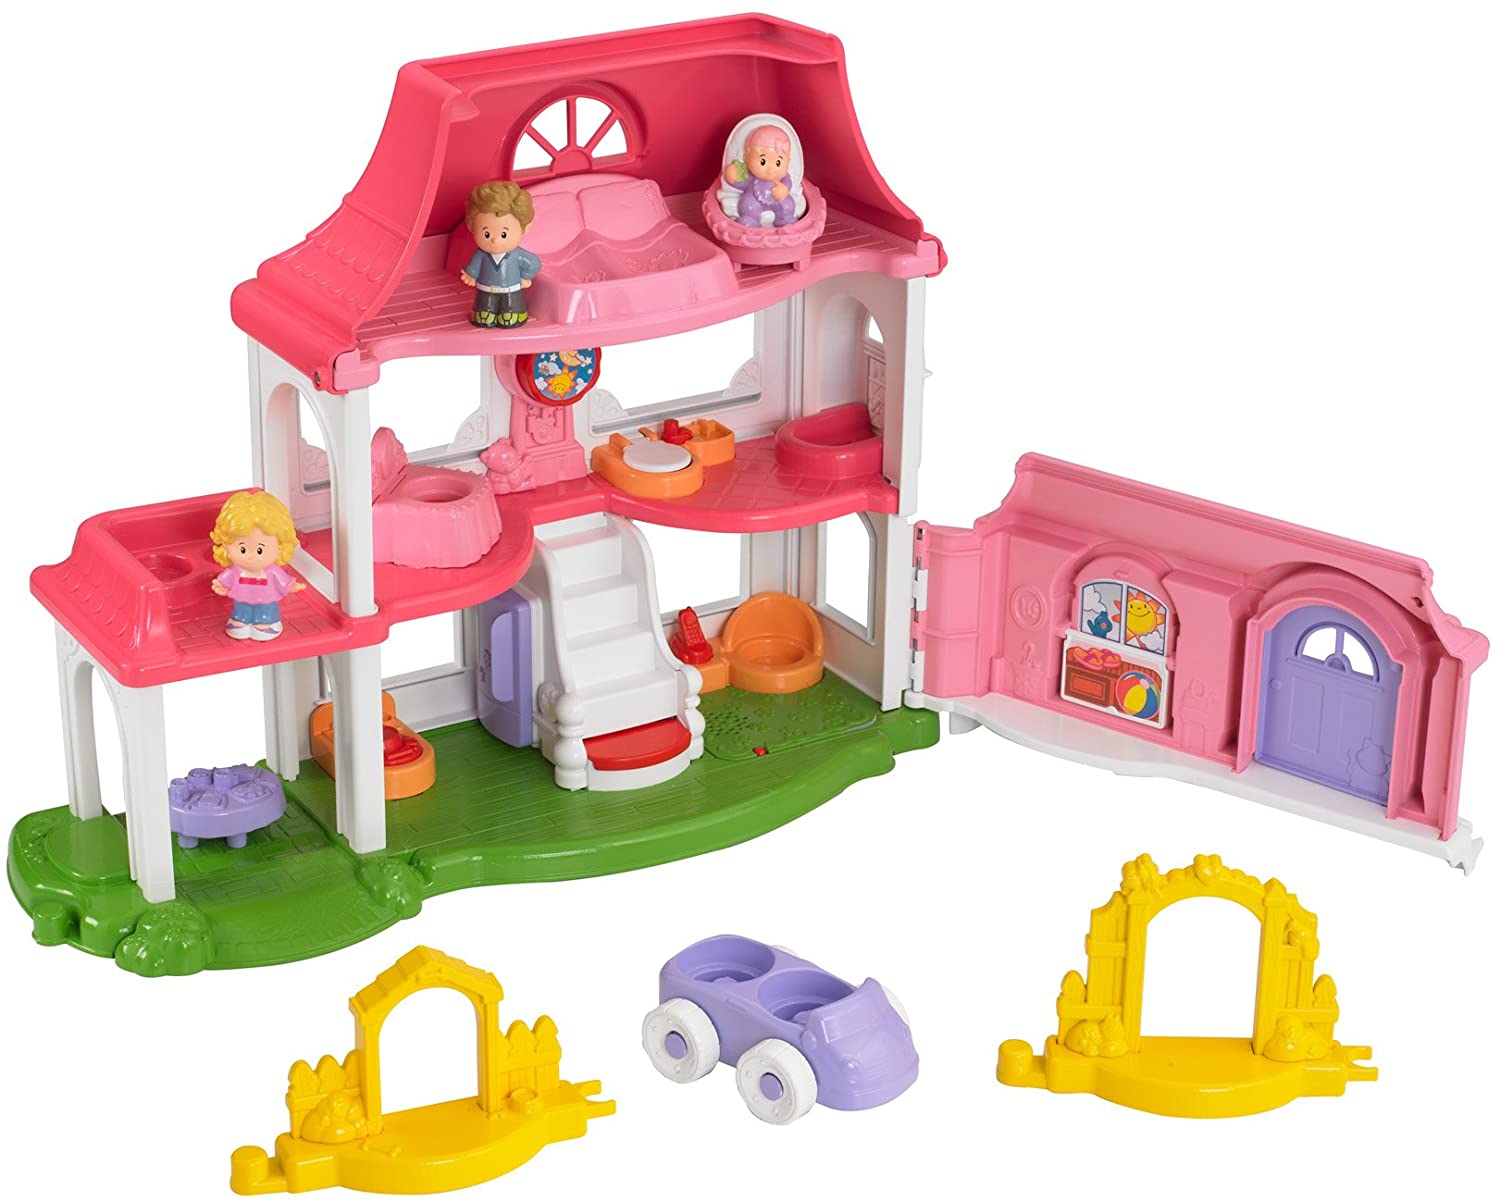 9 Best Fisher Price Dollhouse Reviews of 2022 3